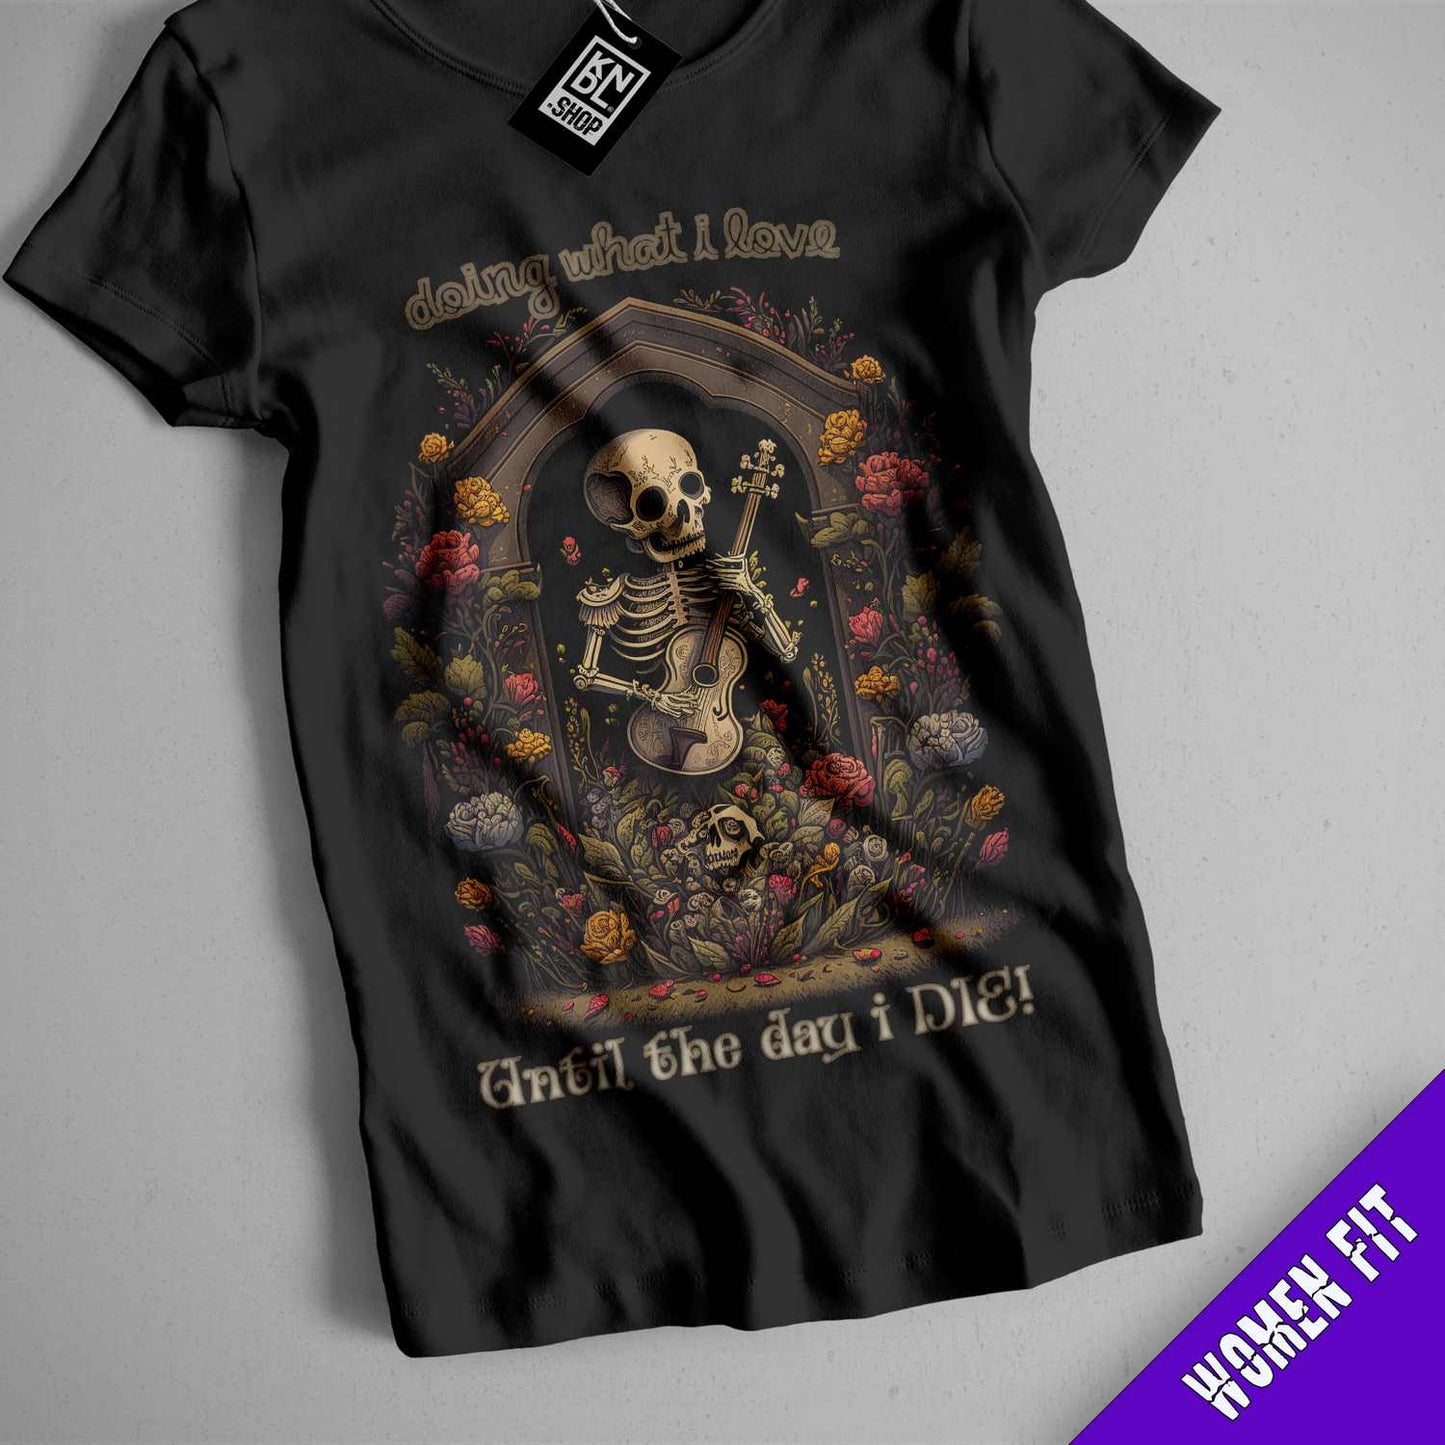 a black shirt with a skeleton holding a guitar